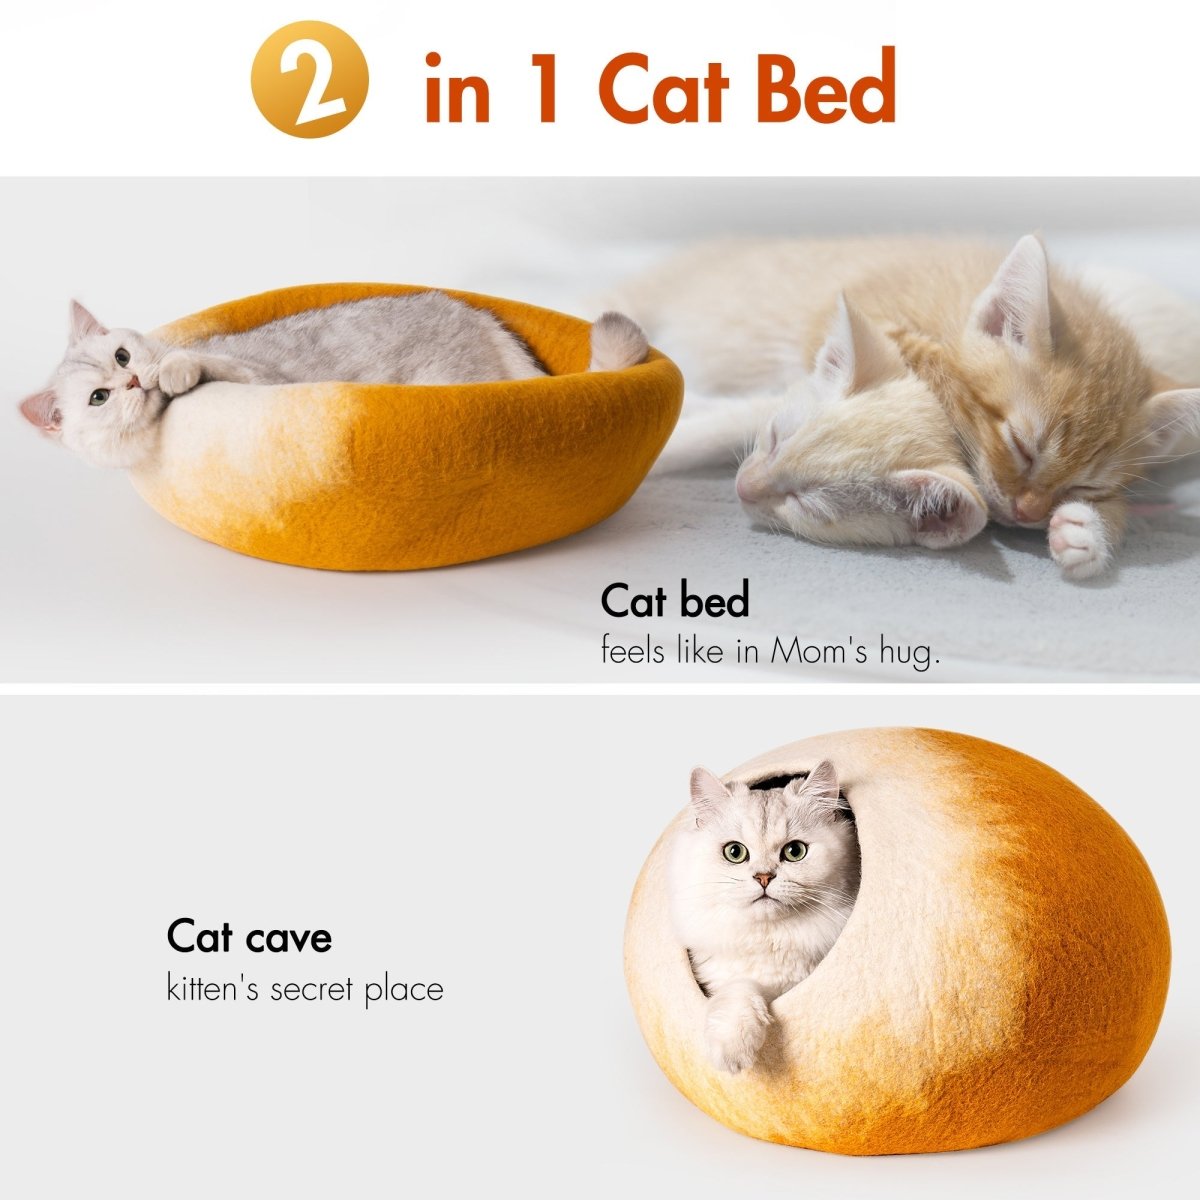 MewooFun Trendy Felt Cat Bed Cave Round Nest Wool Bed Gray for Cats - Taplike